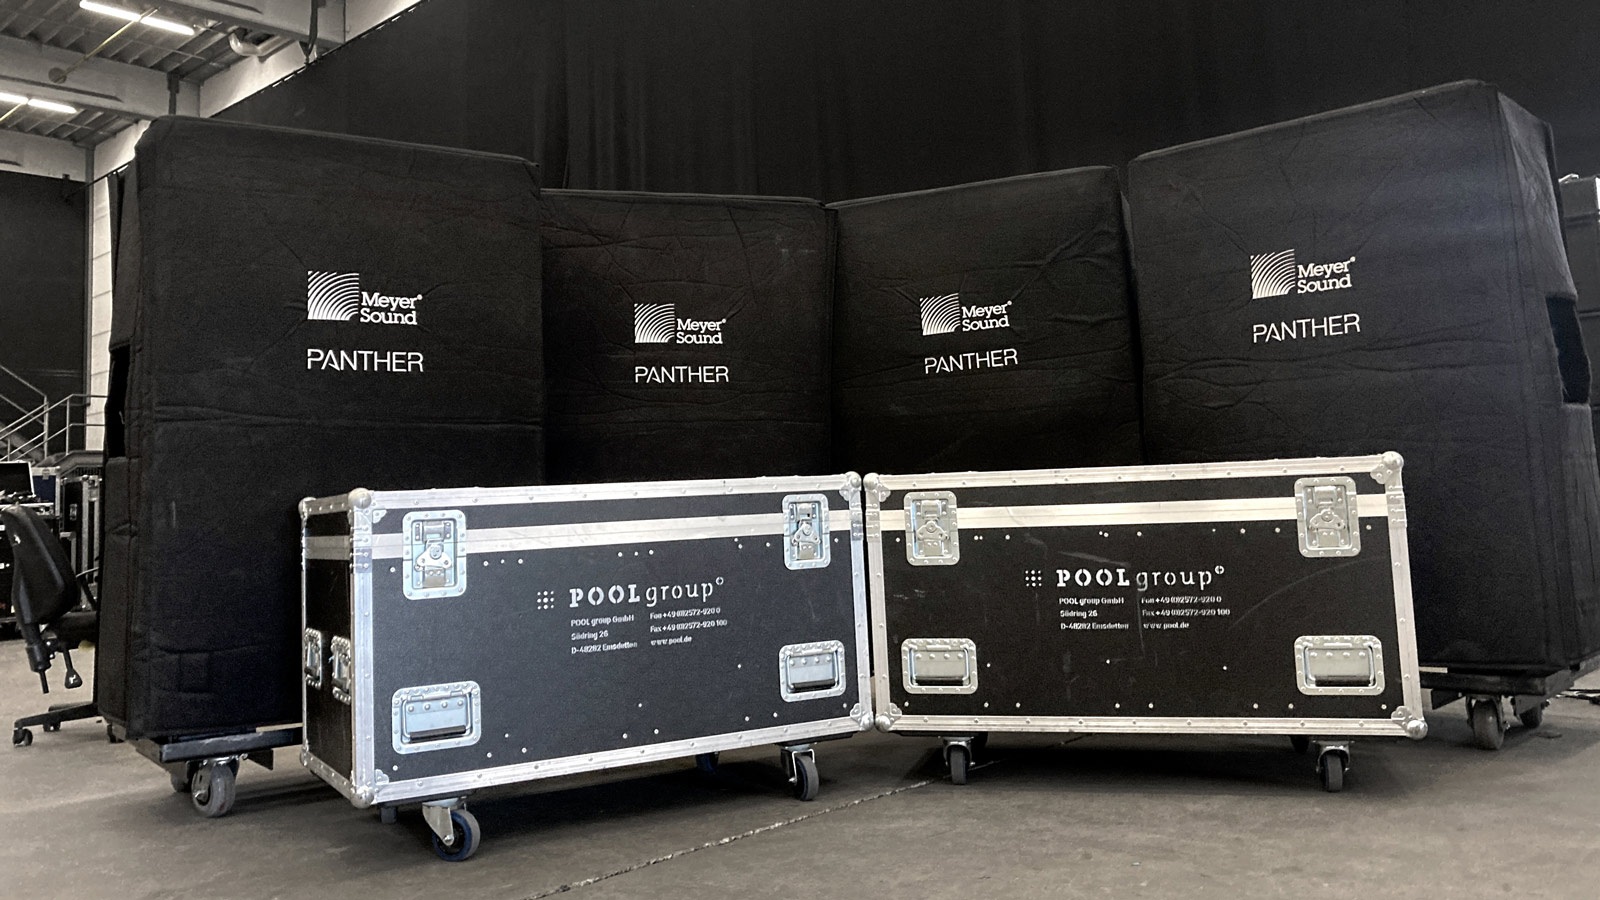 Meyer Sound PANTHER Bolsters Germany’s POOLgroup Global Touring and Events Business